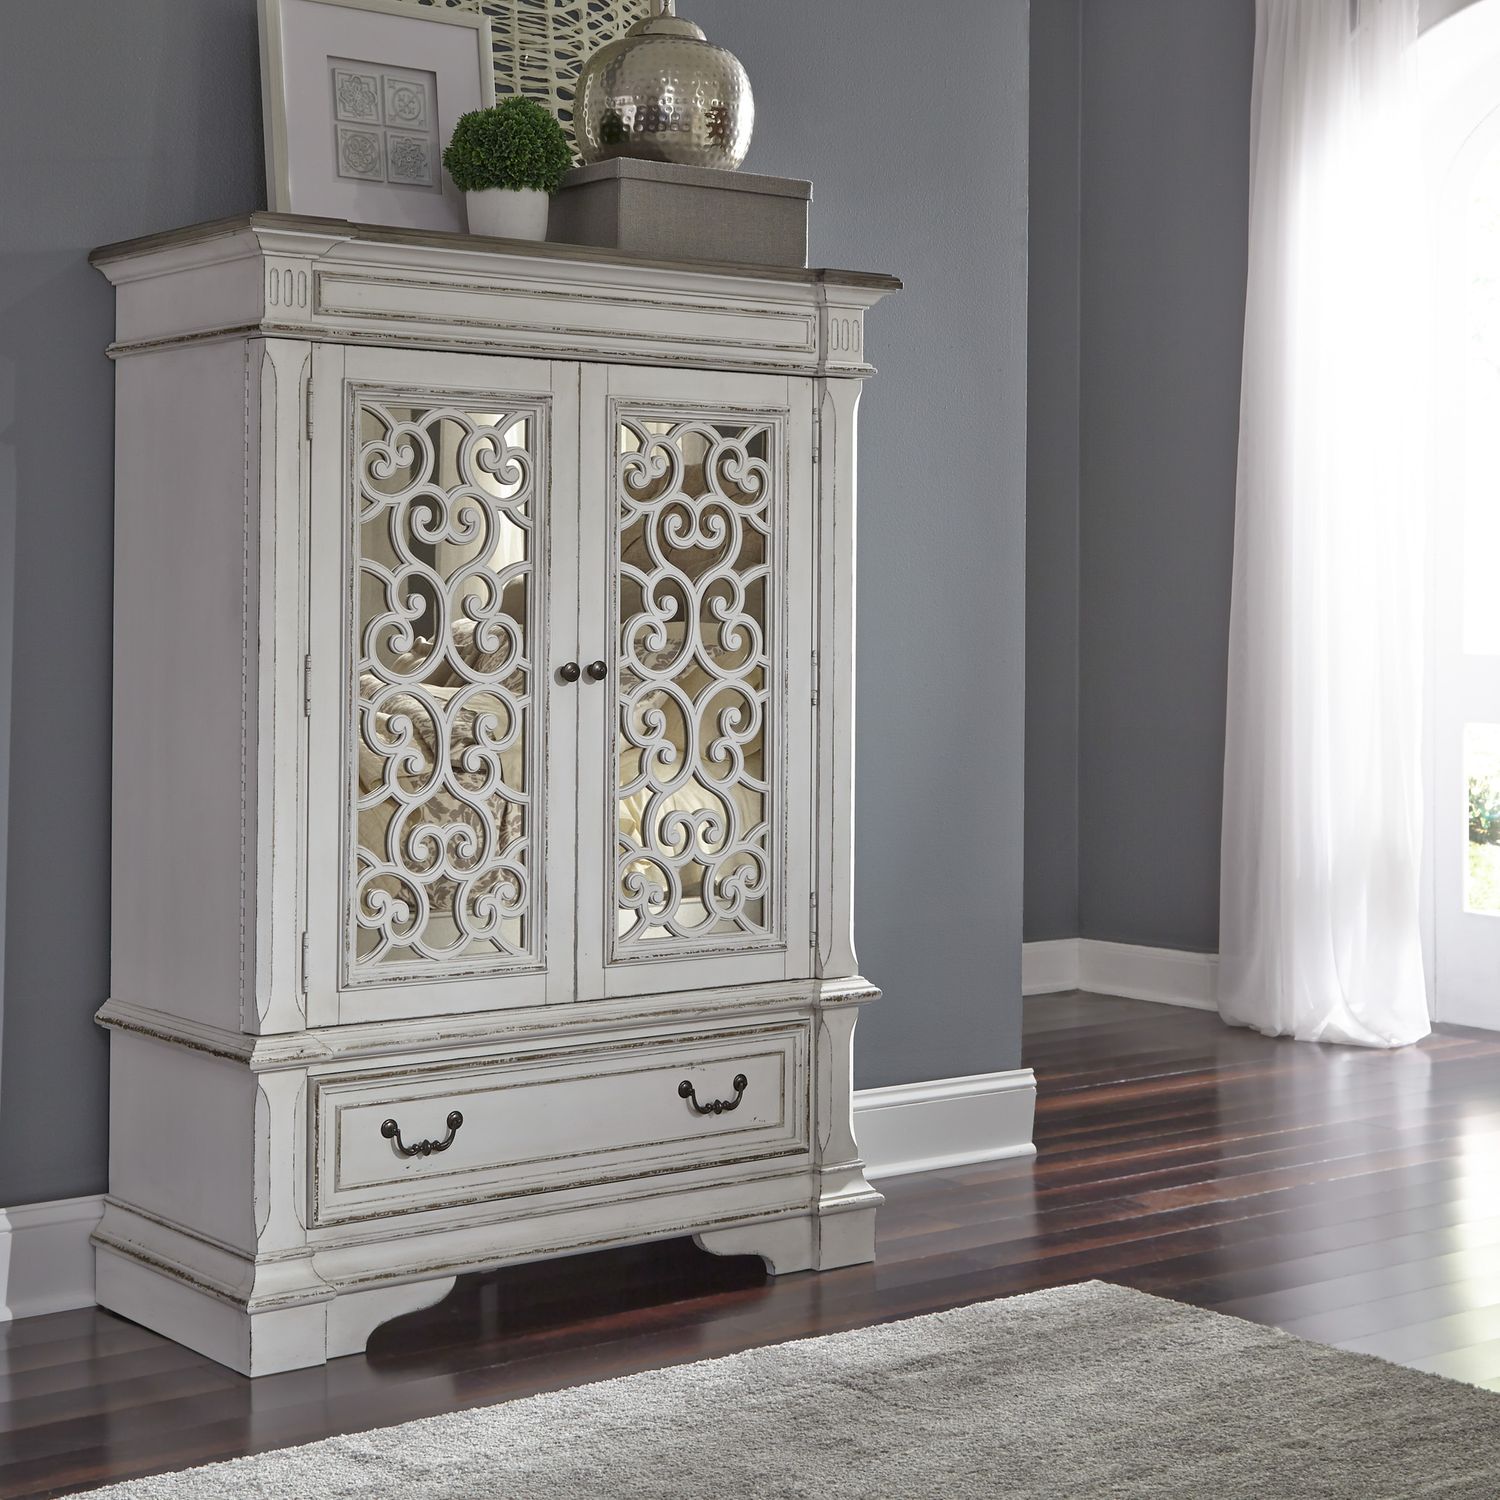 Abbey Park / Mirrored 2 Door Chest SKU: 520-BR42 Liberty Furniture